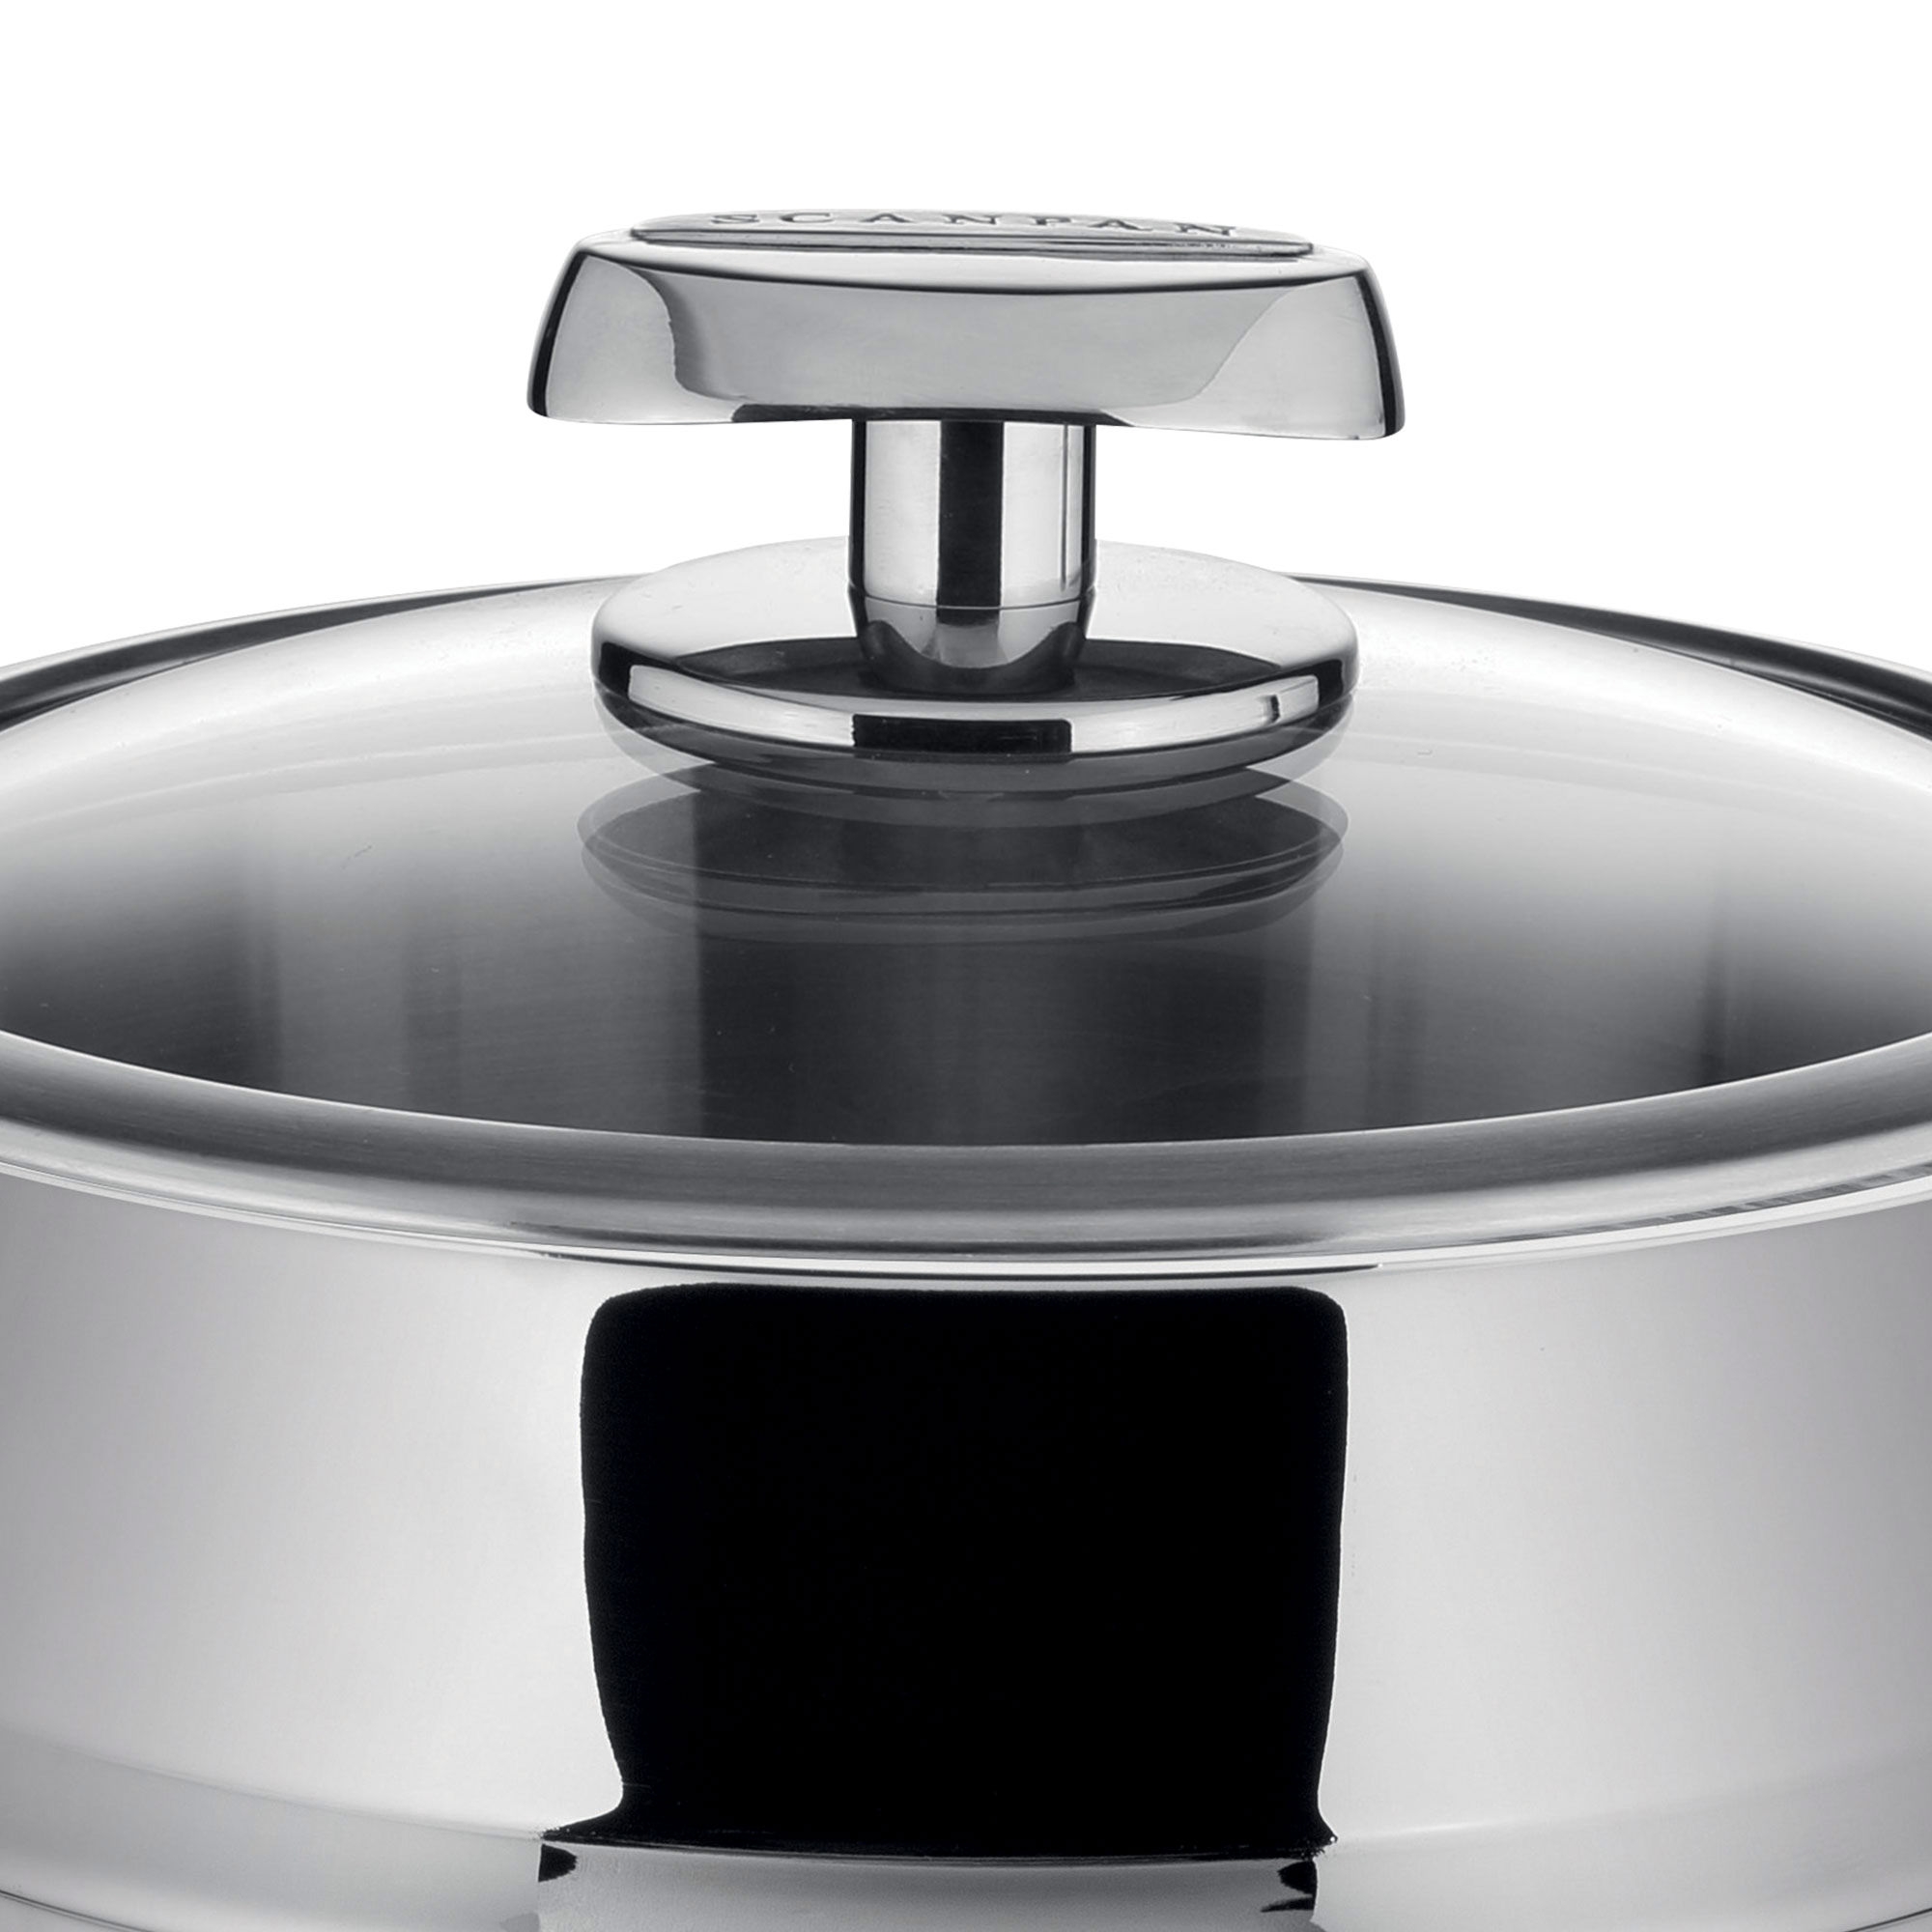 Scanpan Axis Multi Steamer Insert with Lid Image 2